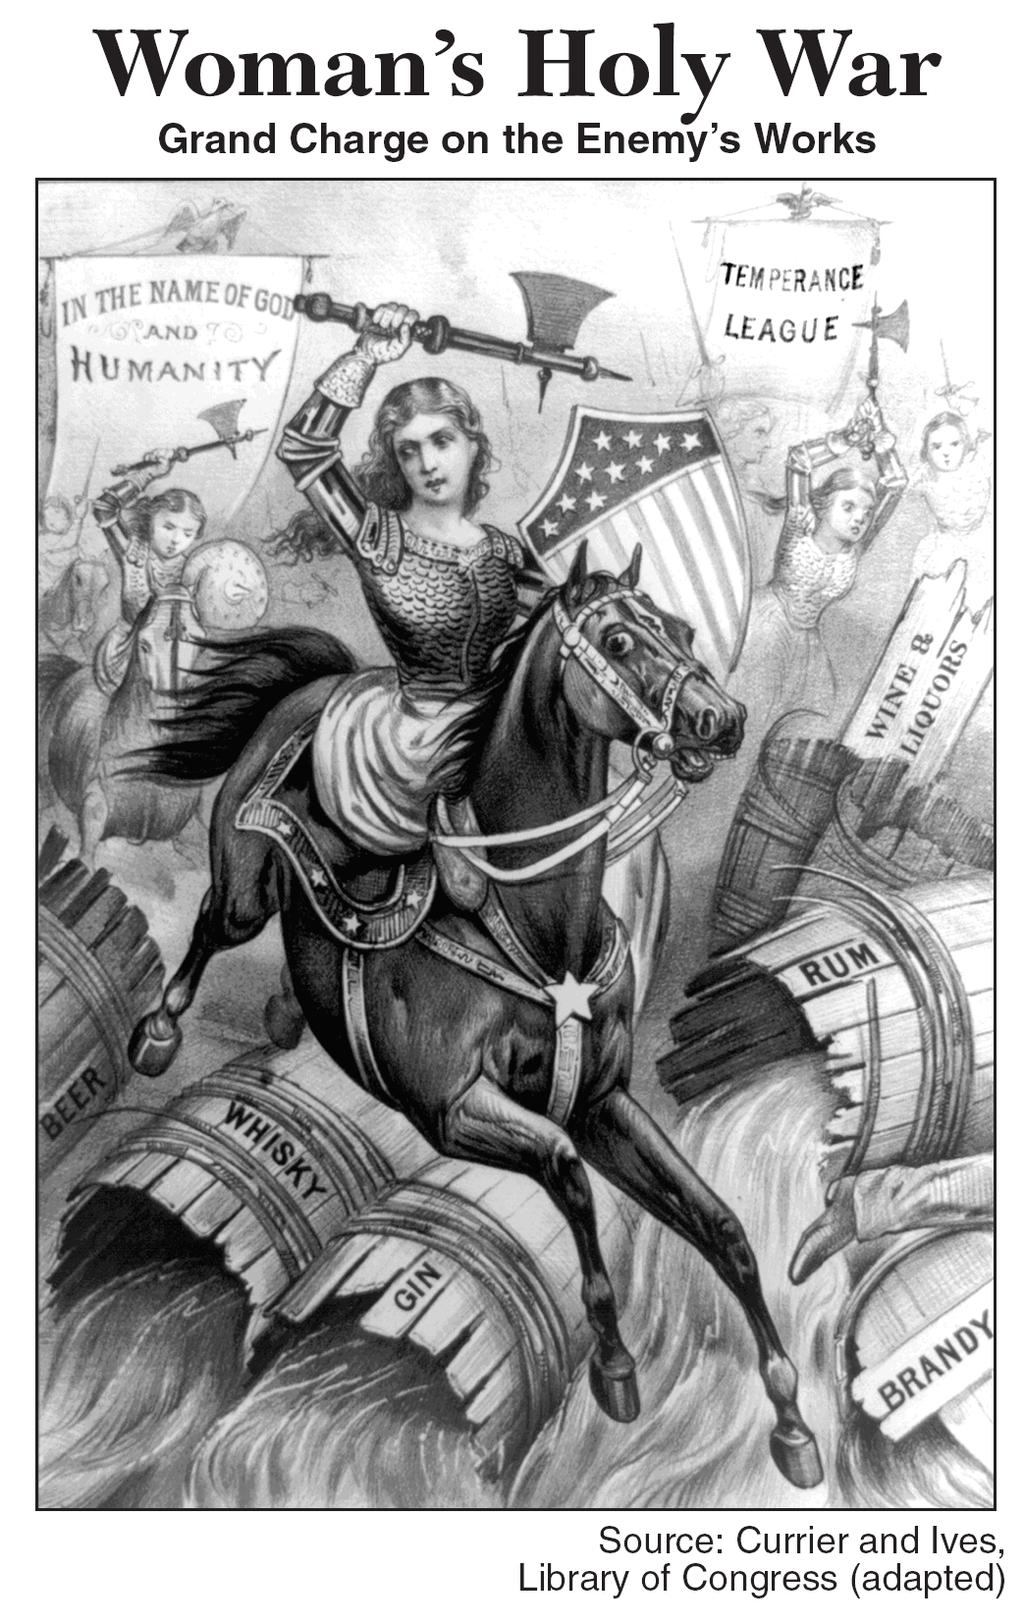 United States corporations 19 Women gained a victory in the war shown in the cartoon through the (1) ratification of a constitutional amendment (2) legalization of birth control (3) expansion of